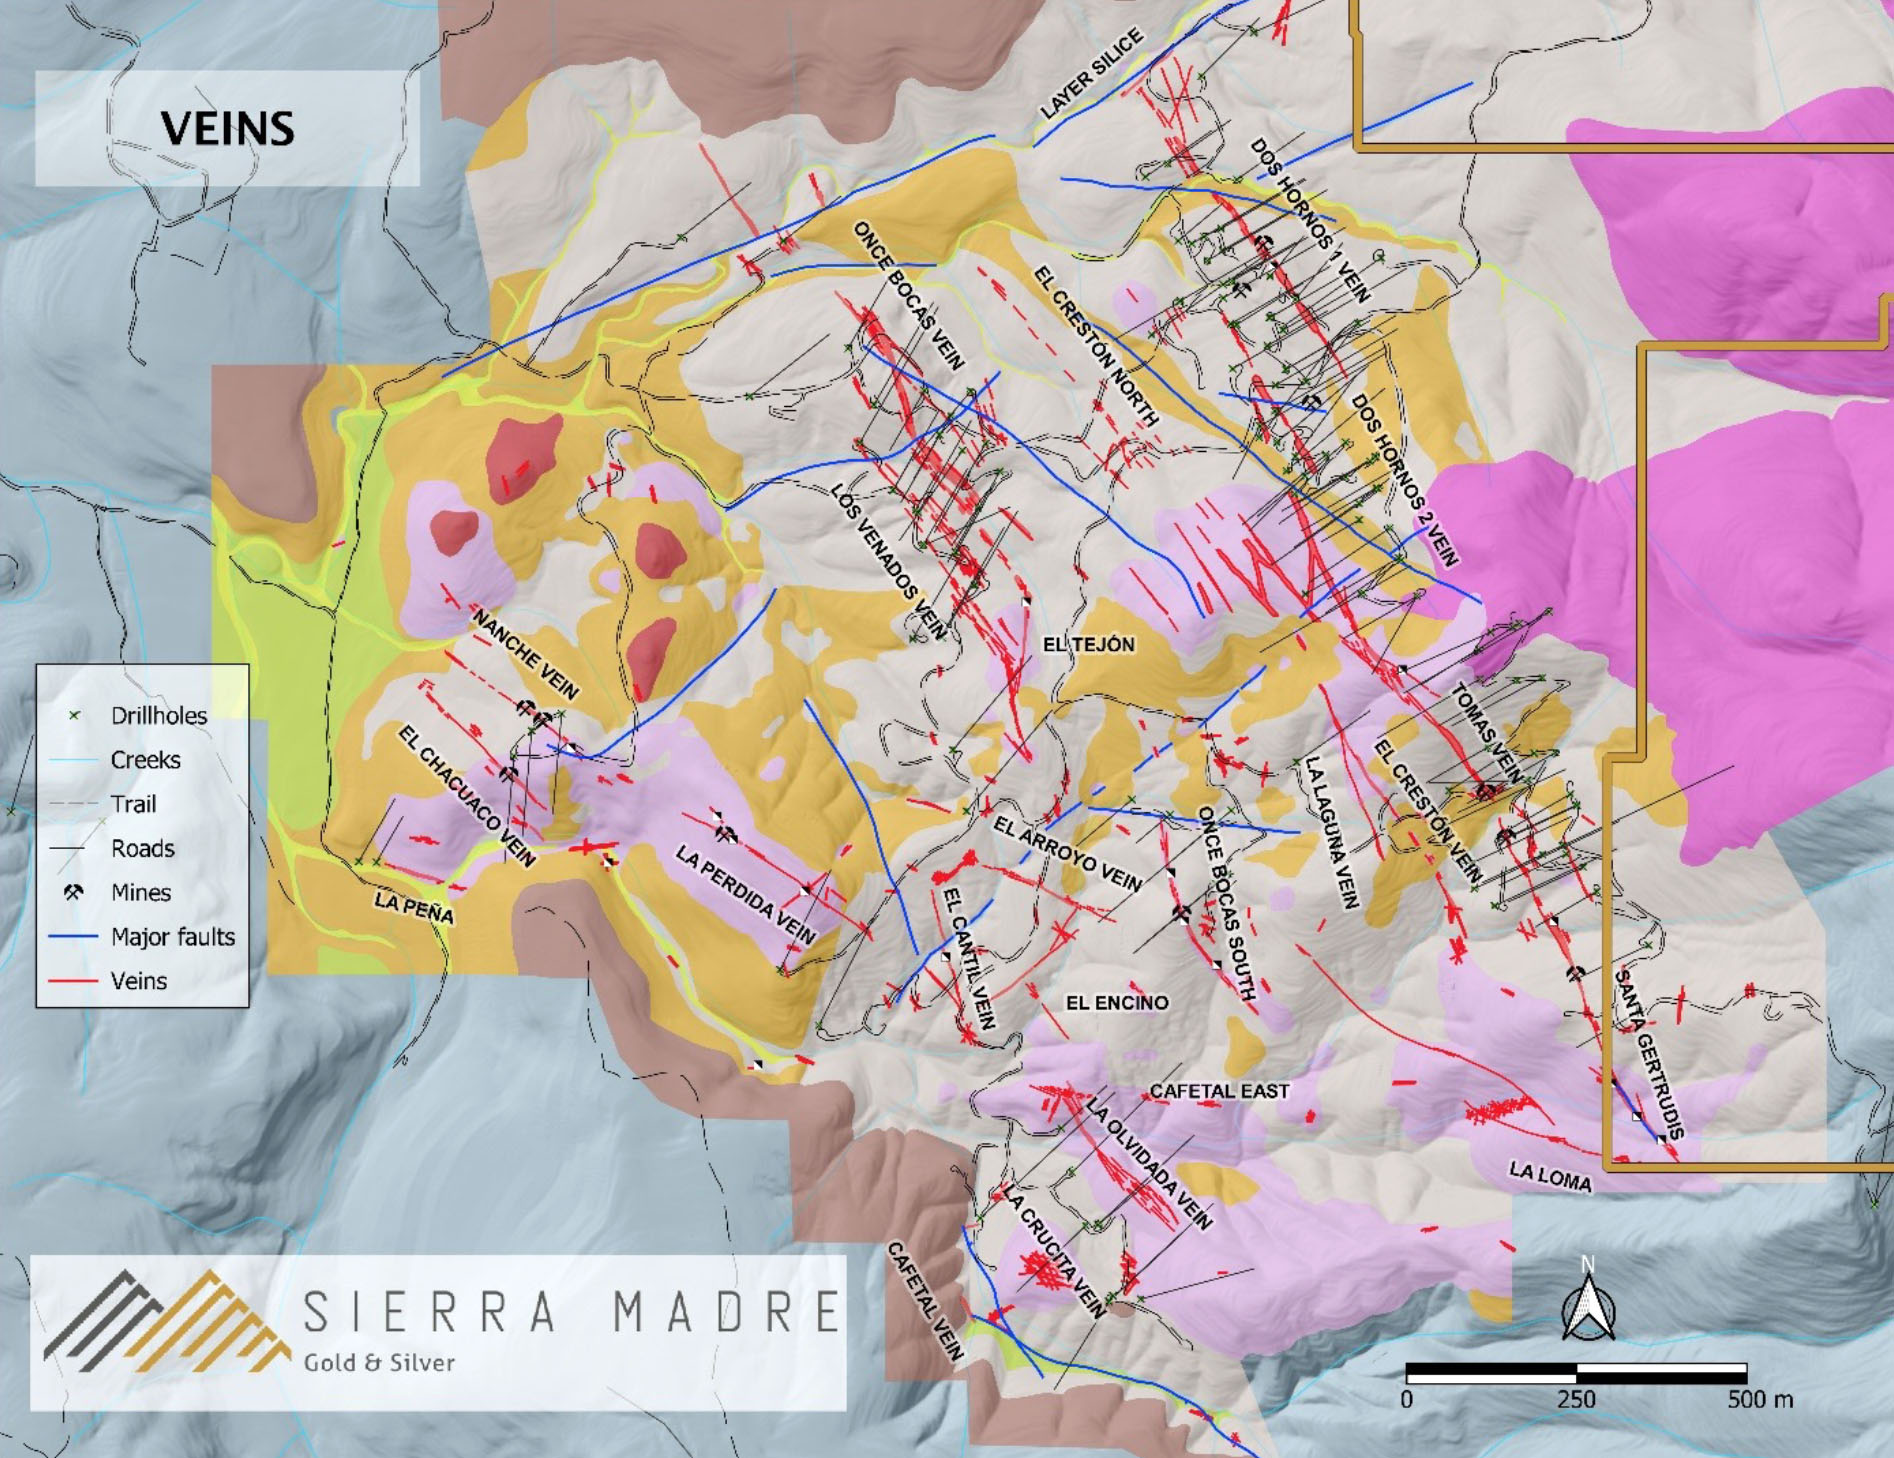 Over 9 km of mineralized structures identified to date